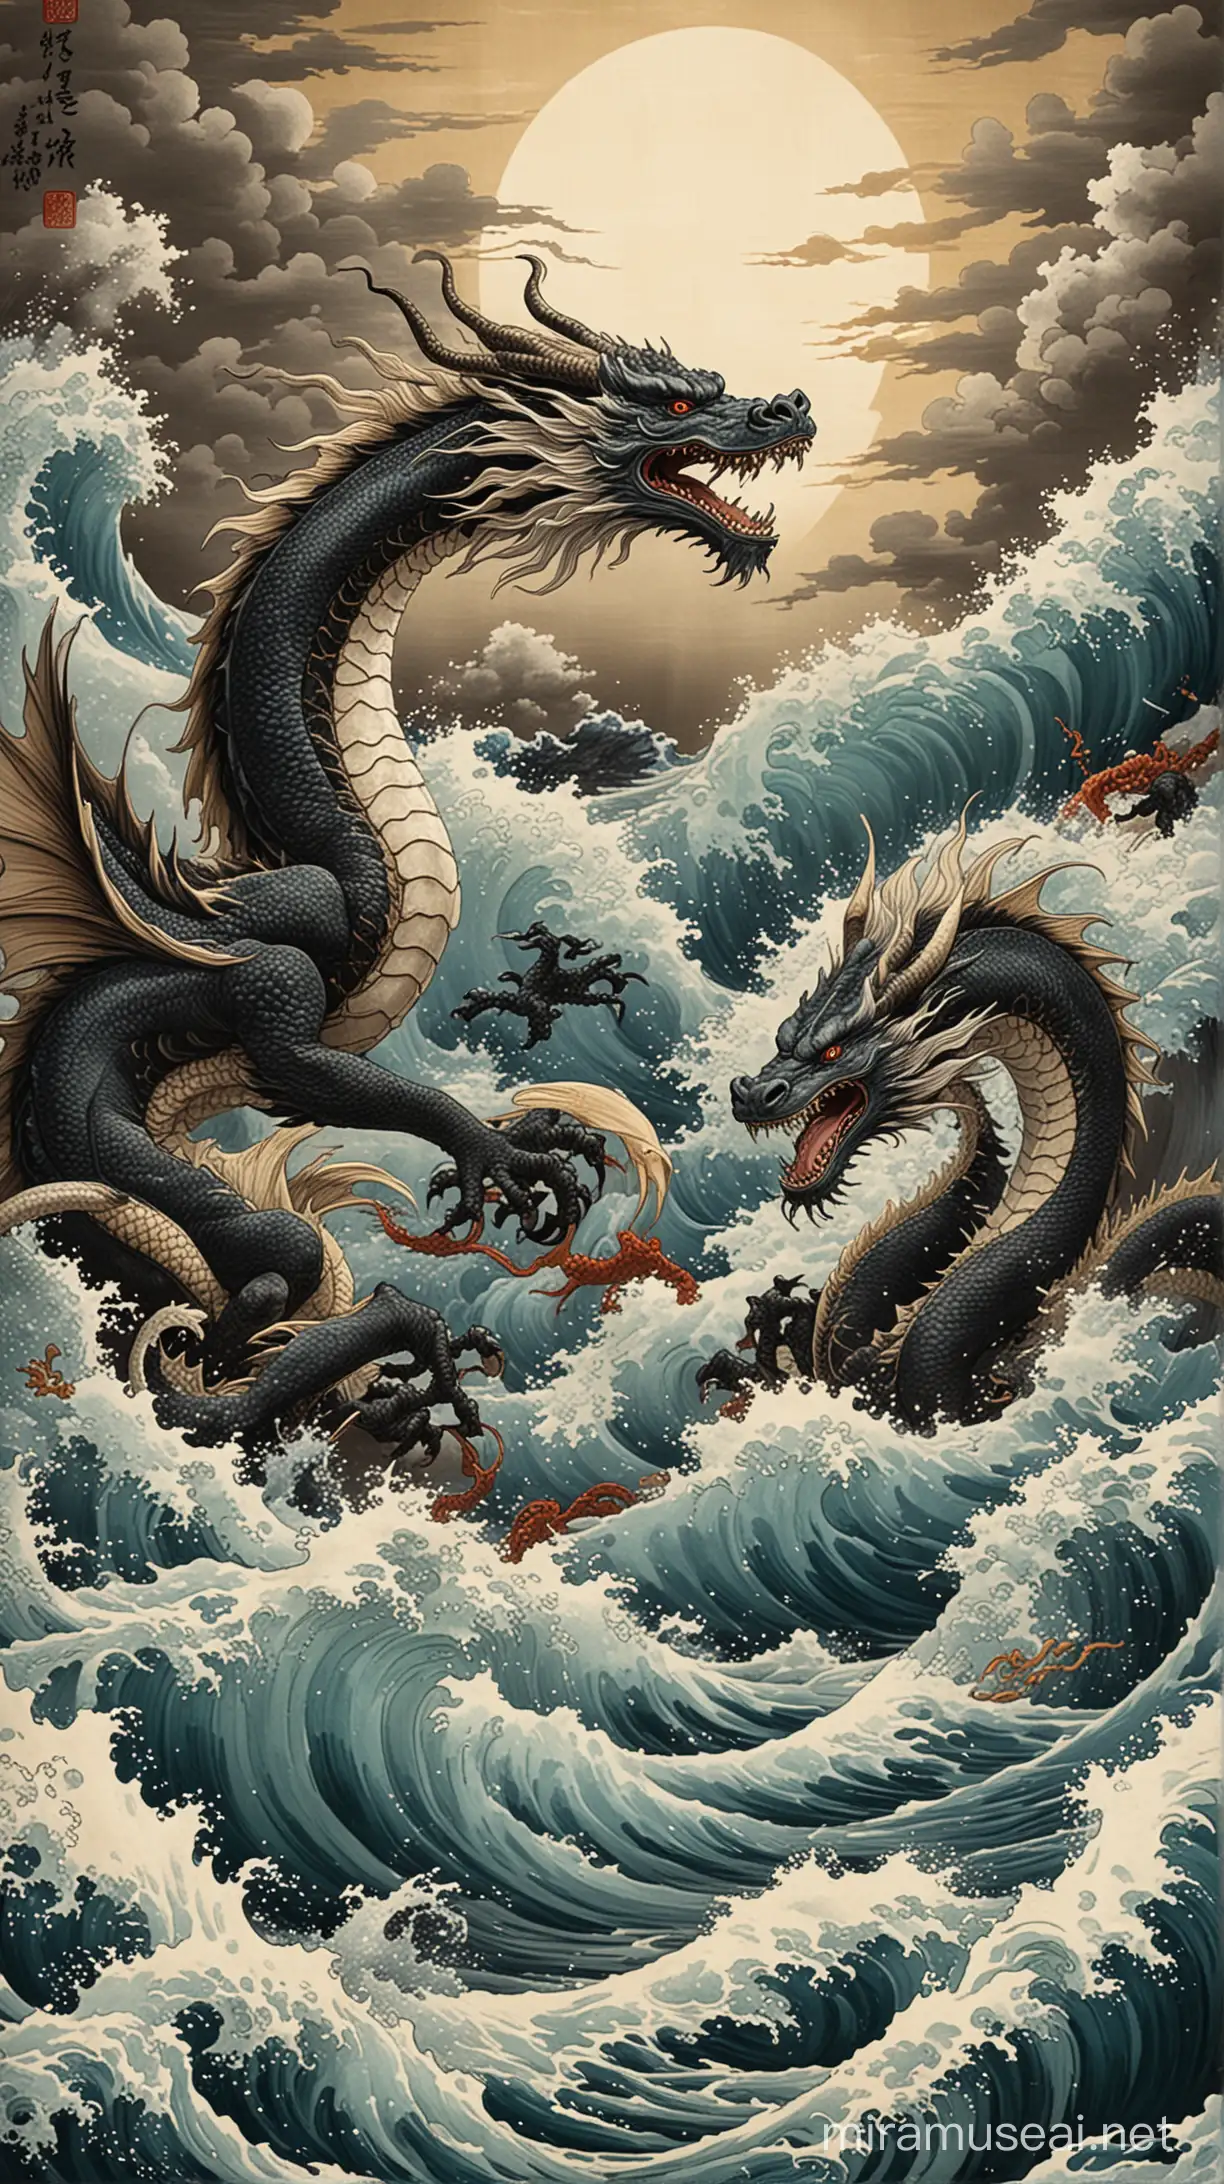 Epic Clash of Slender Chinese Dragons in Hokusai Art Style